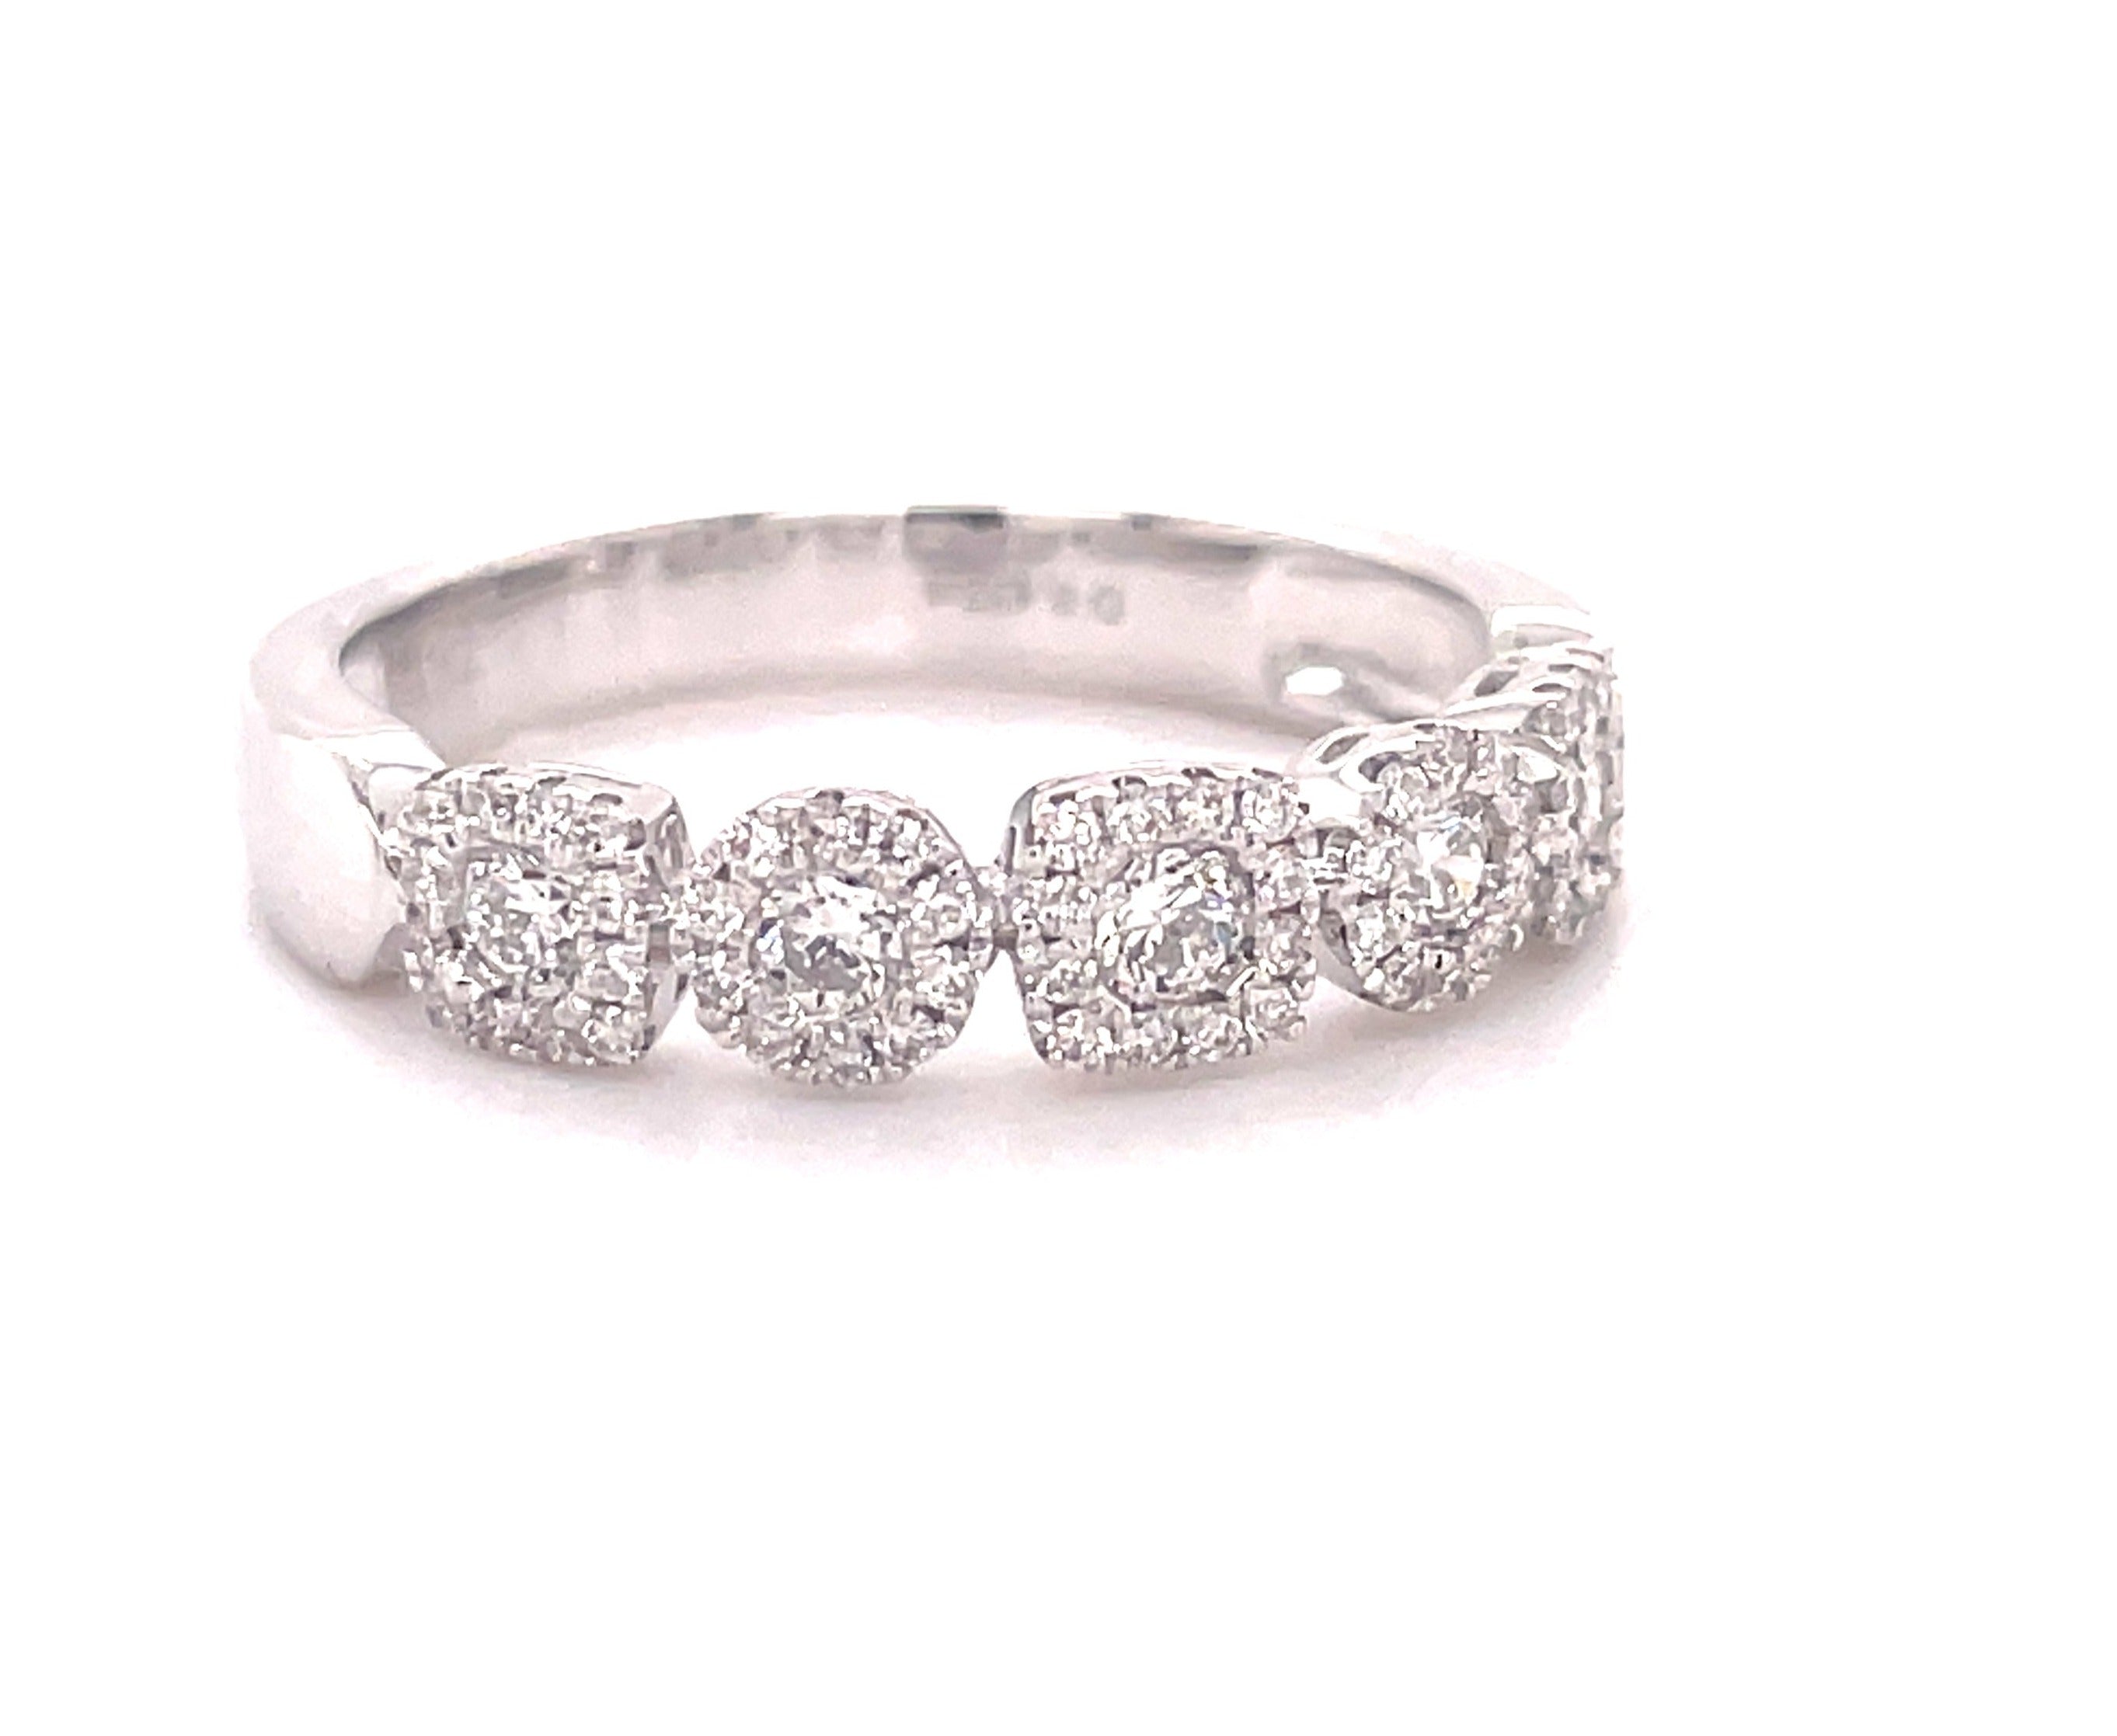 This stunning diamond cluster band features two circles and three squares of round diamonds totaling 0.50 carats, set in 18 karat white gold and is size 6.5 (resizable). The band measures 4.50 mm in width.